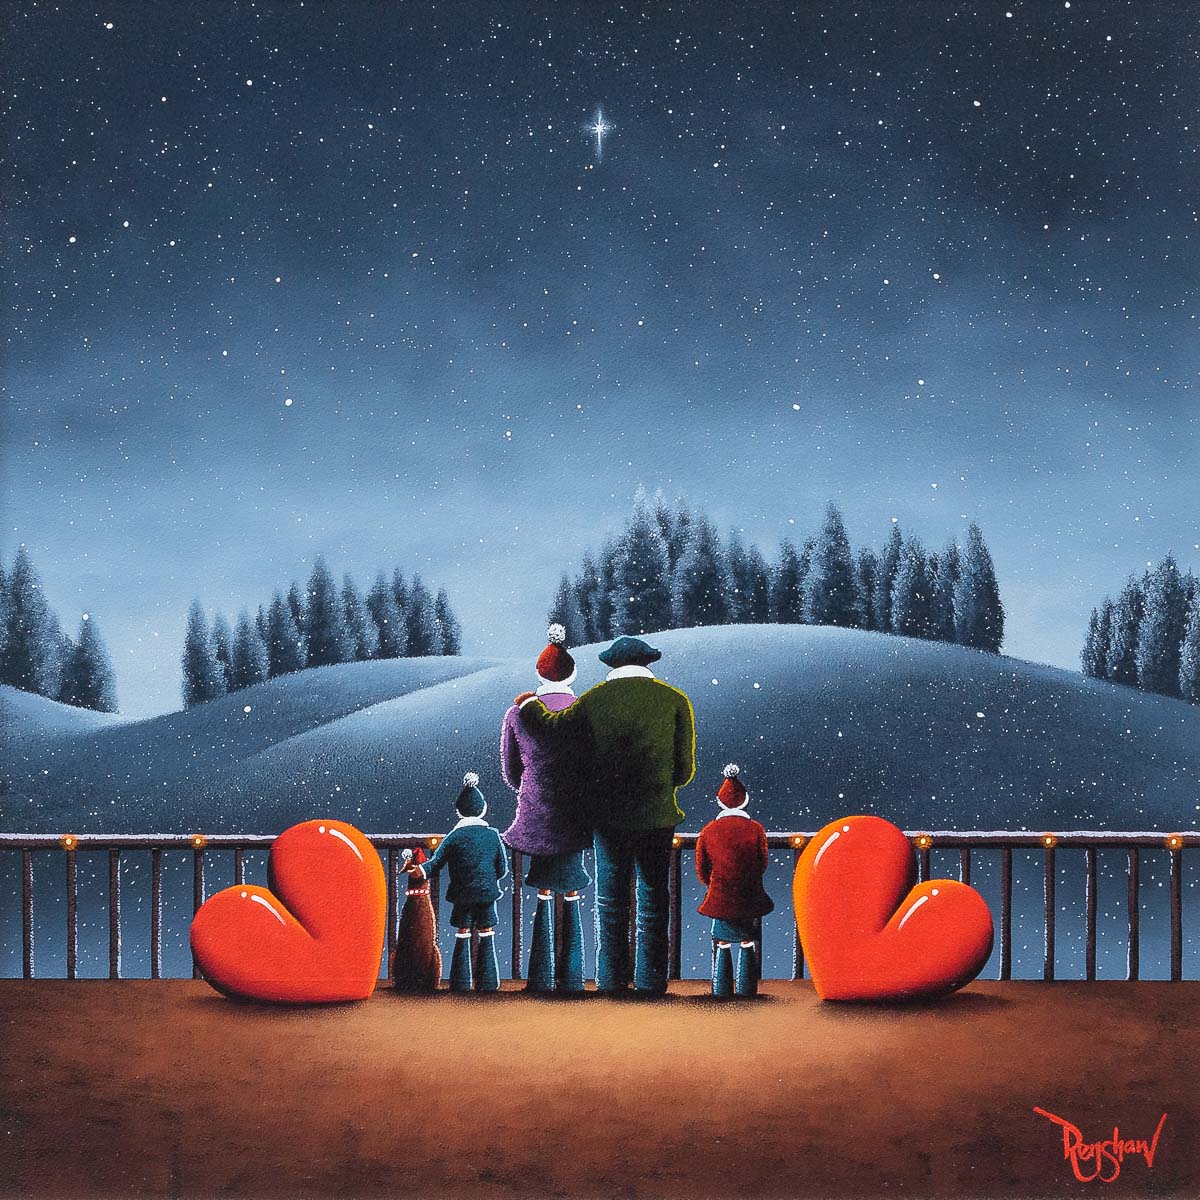 Our Family Star David Renshaw Framed